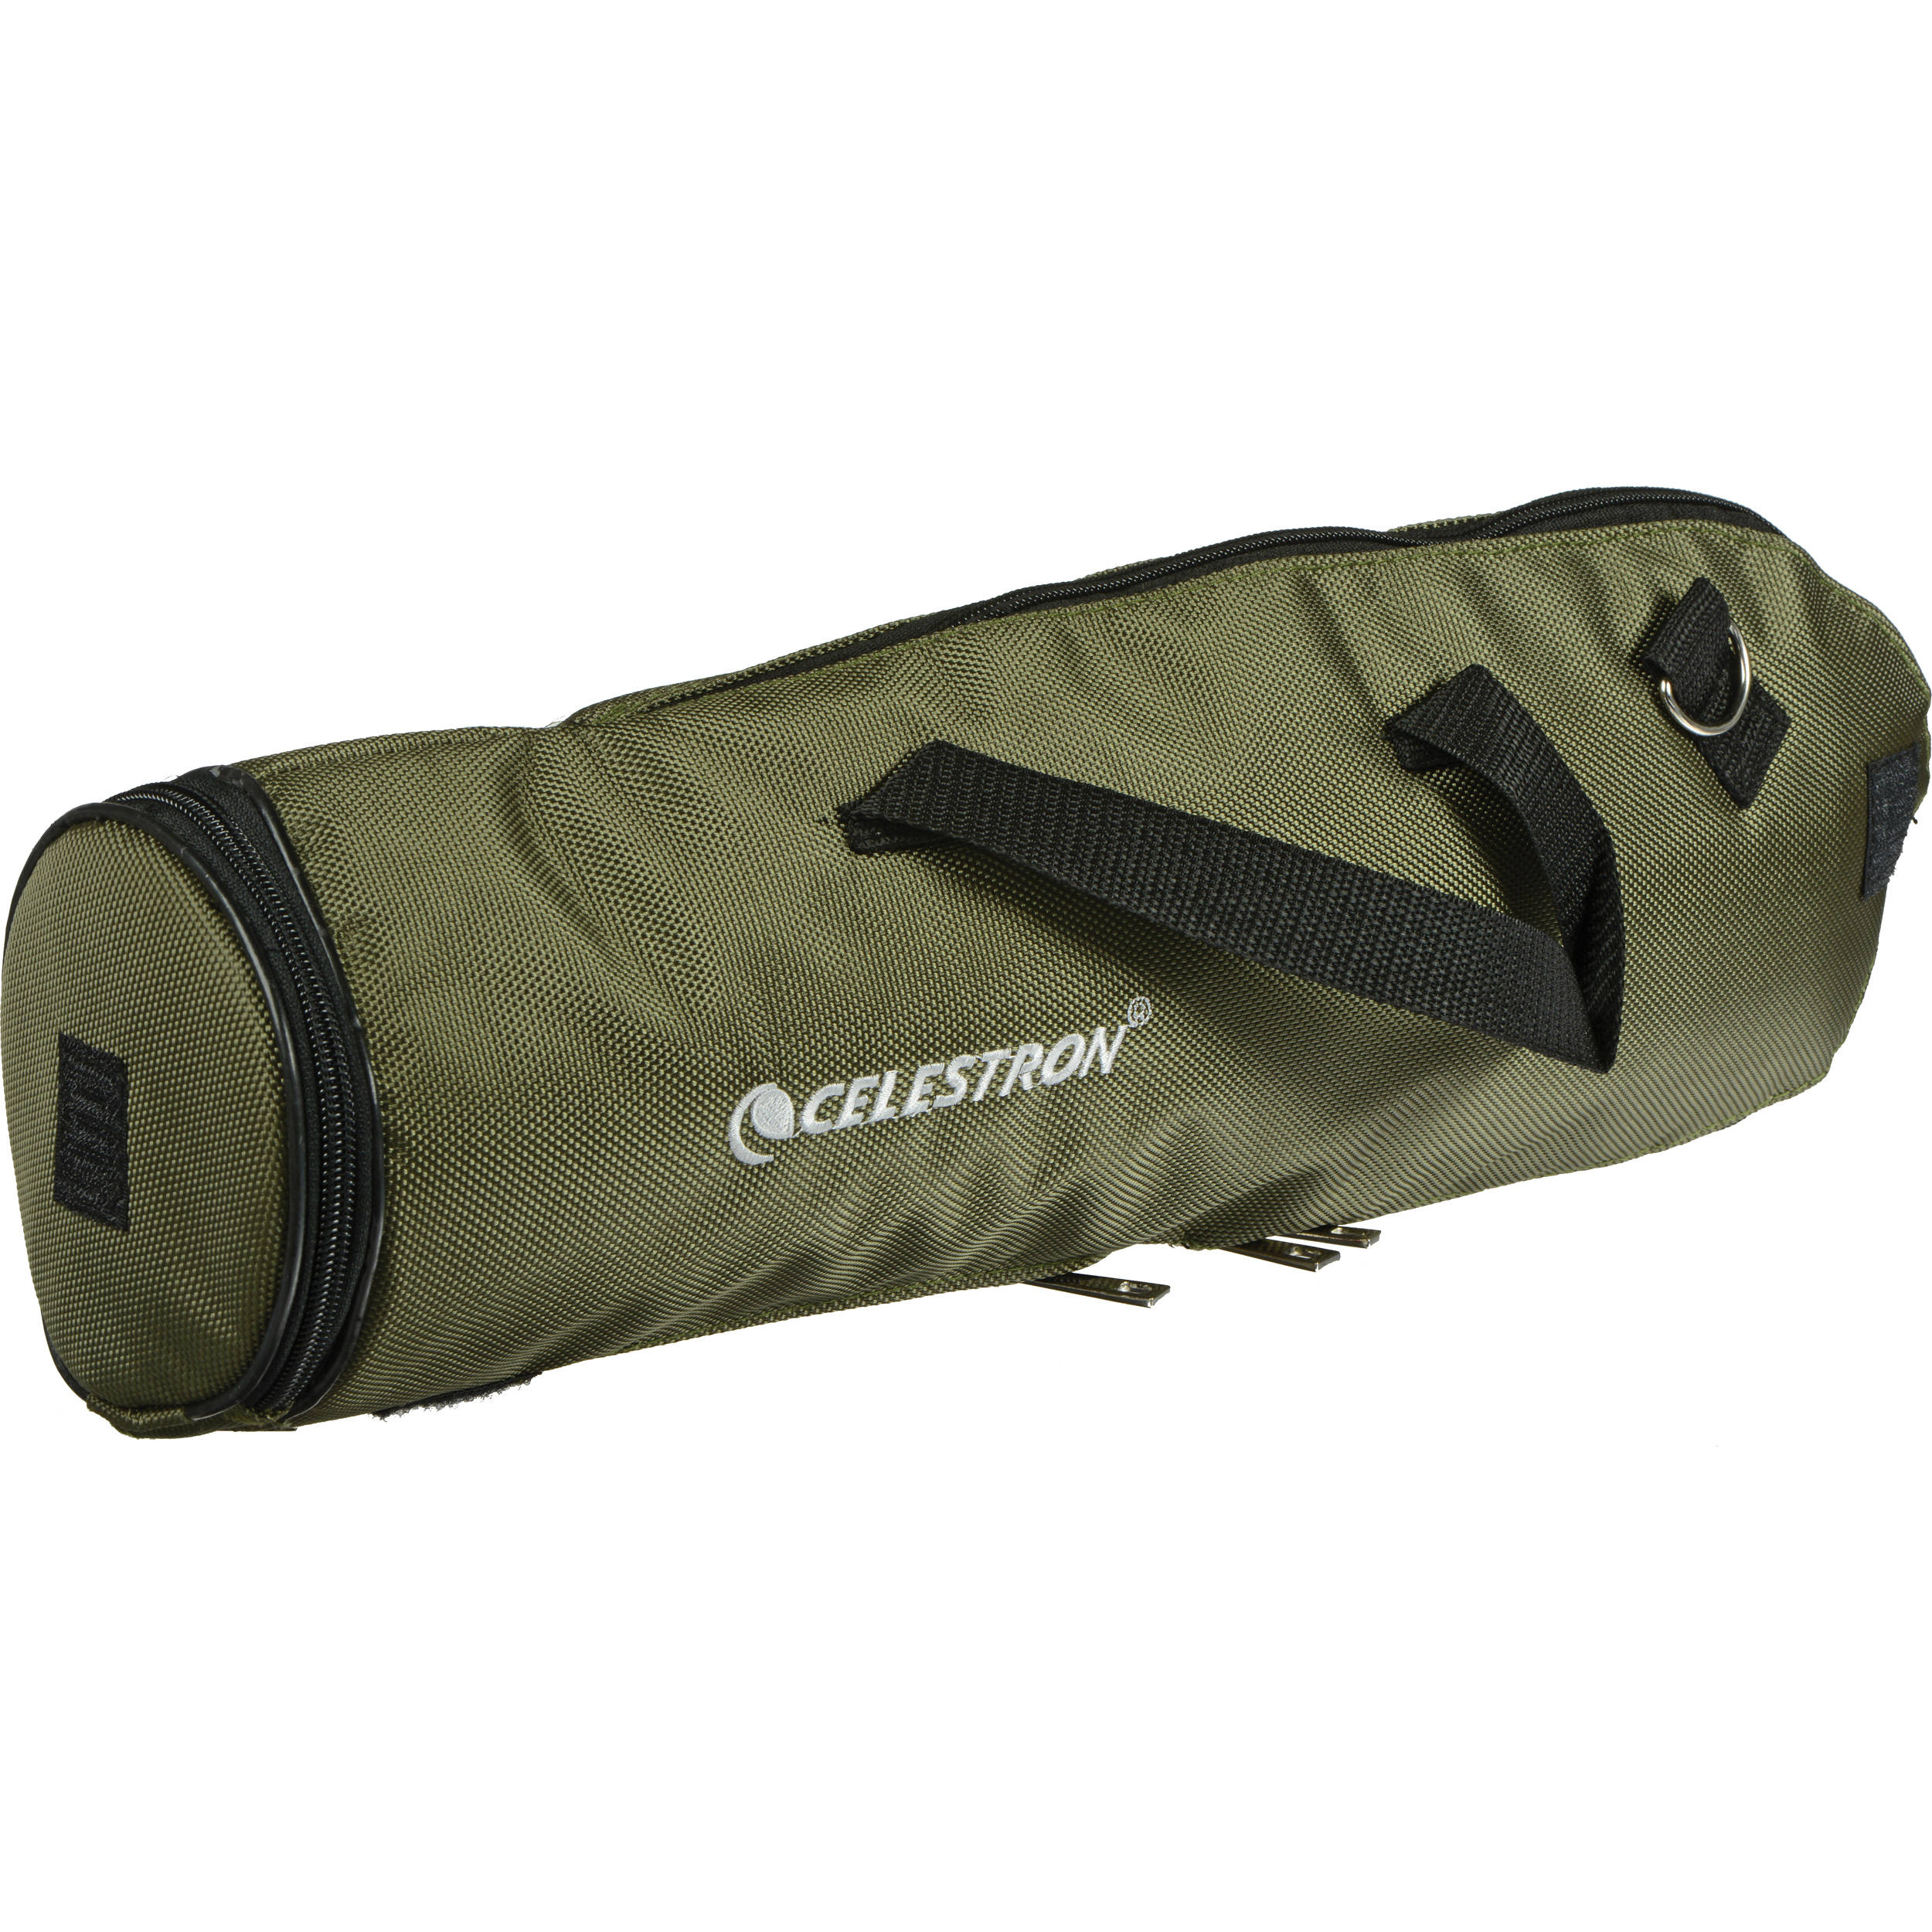 Celestron 80mm Spotting Scope Case for TrailSeeker or Ultima Scopes (Straight Viewing)